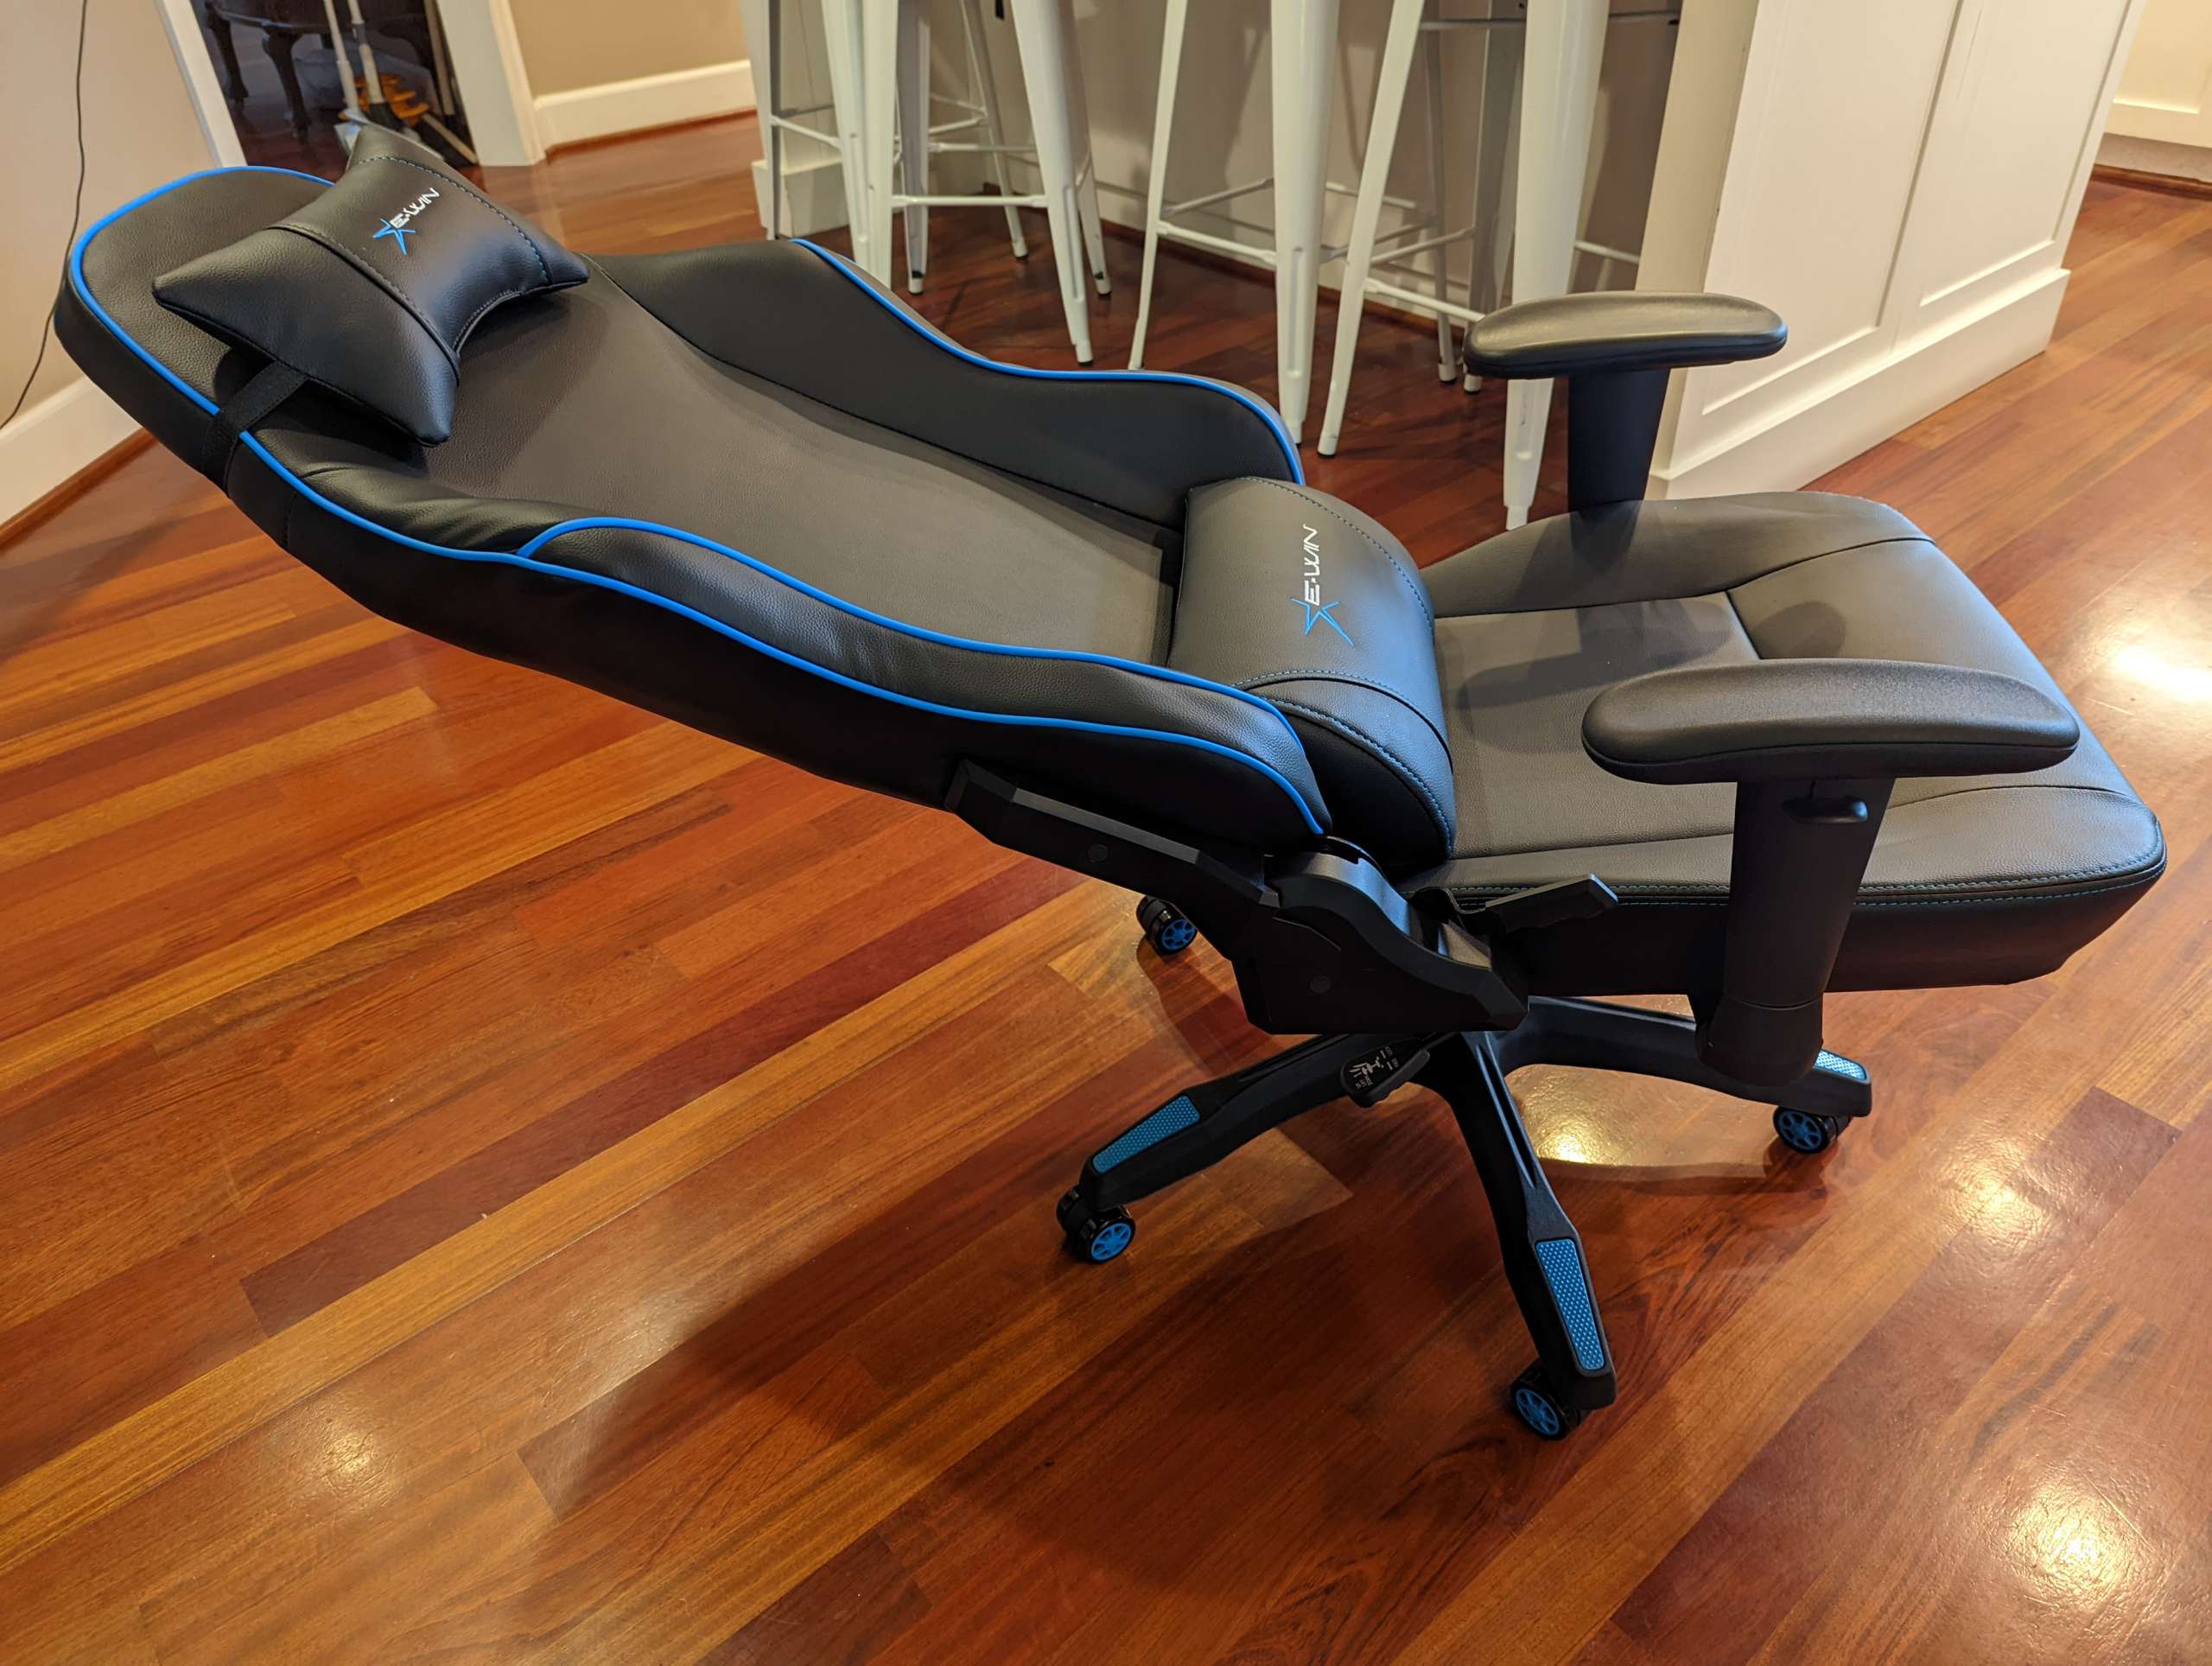 EWin Knight Gaming Chair Review - Pro Tool Reviews